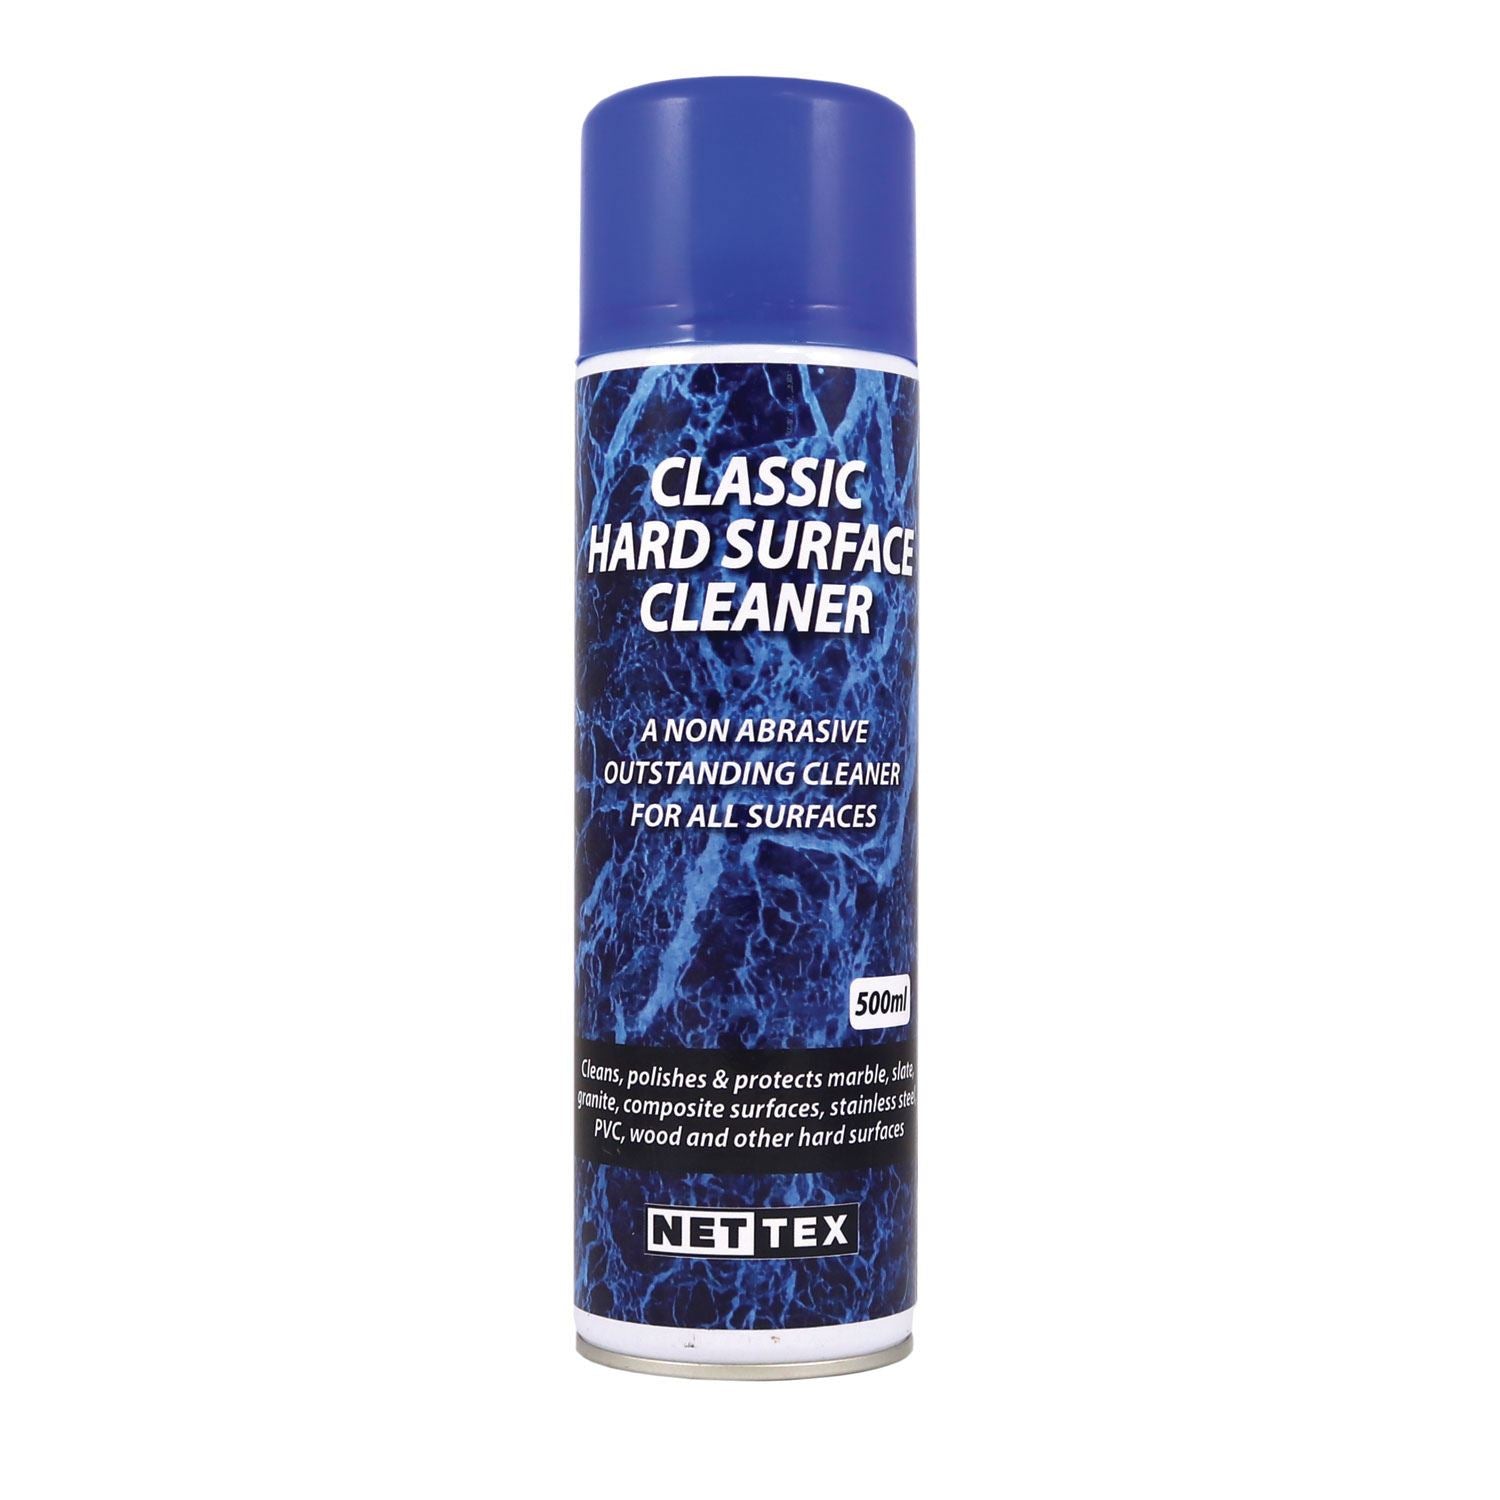 Nettex Classic Hard Surface Cleaner - Just Horse Riders